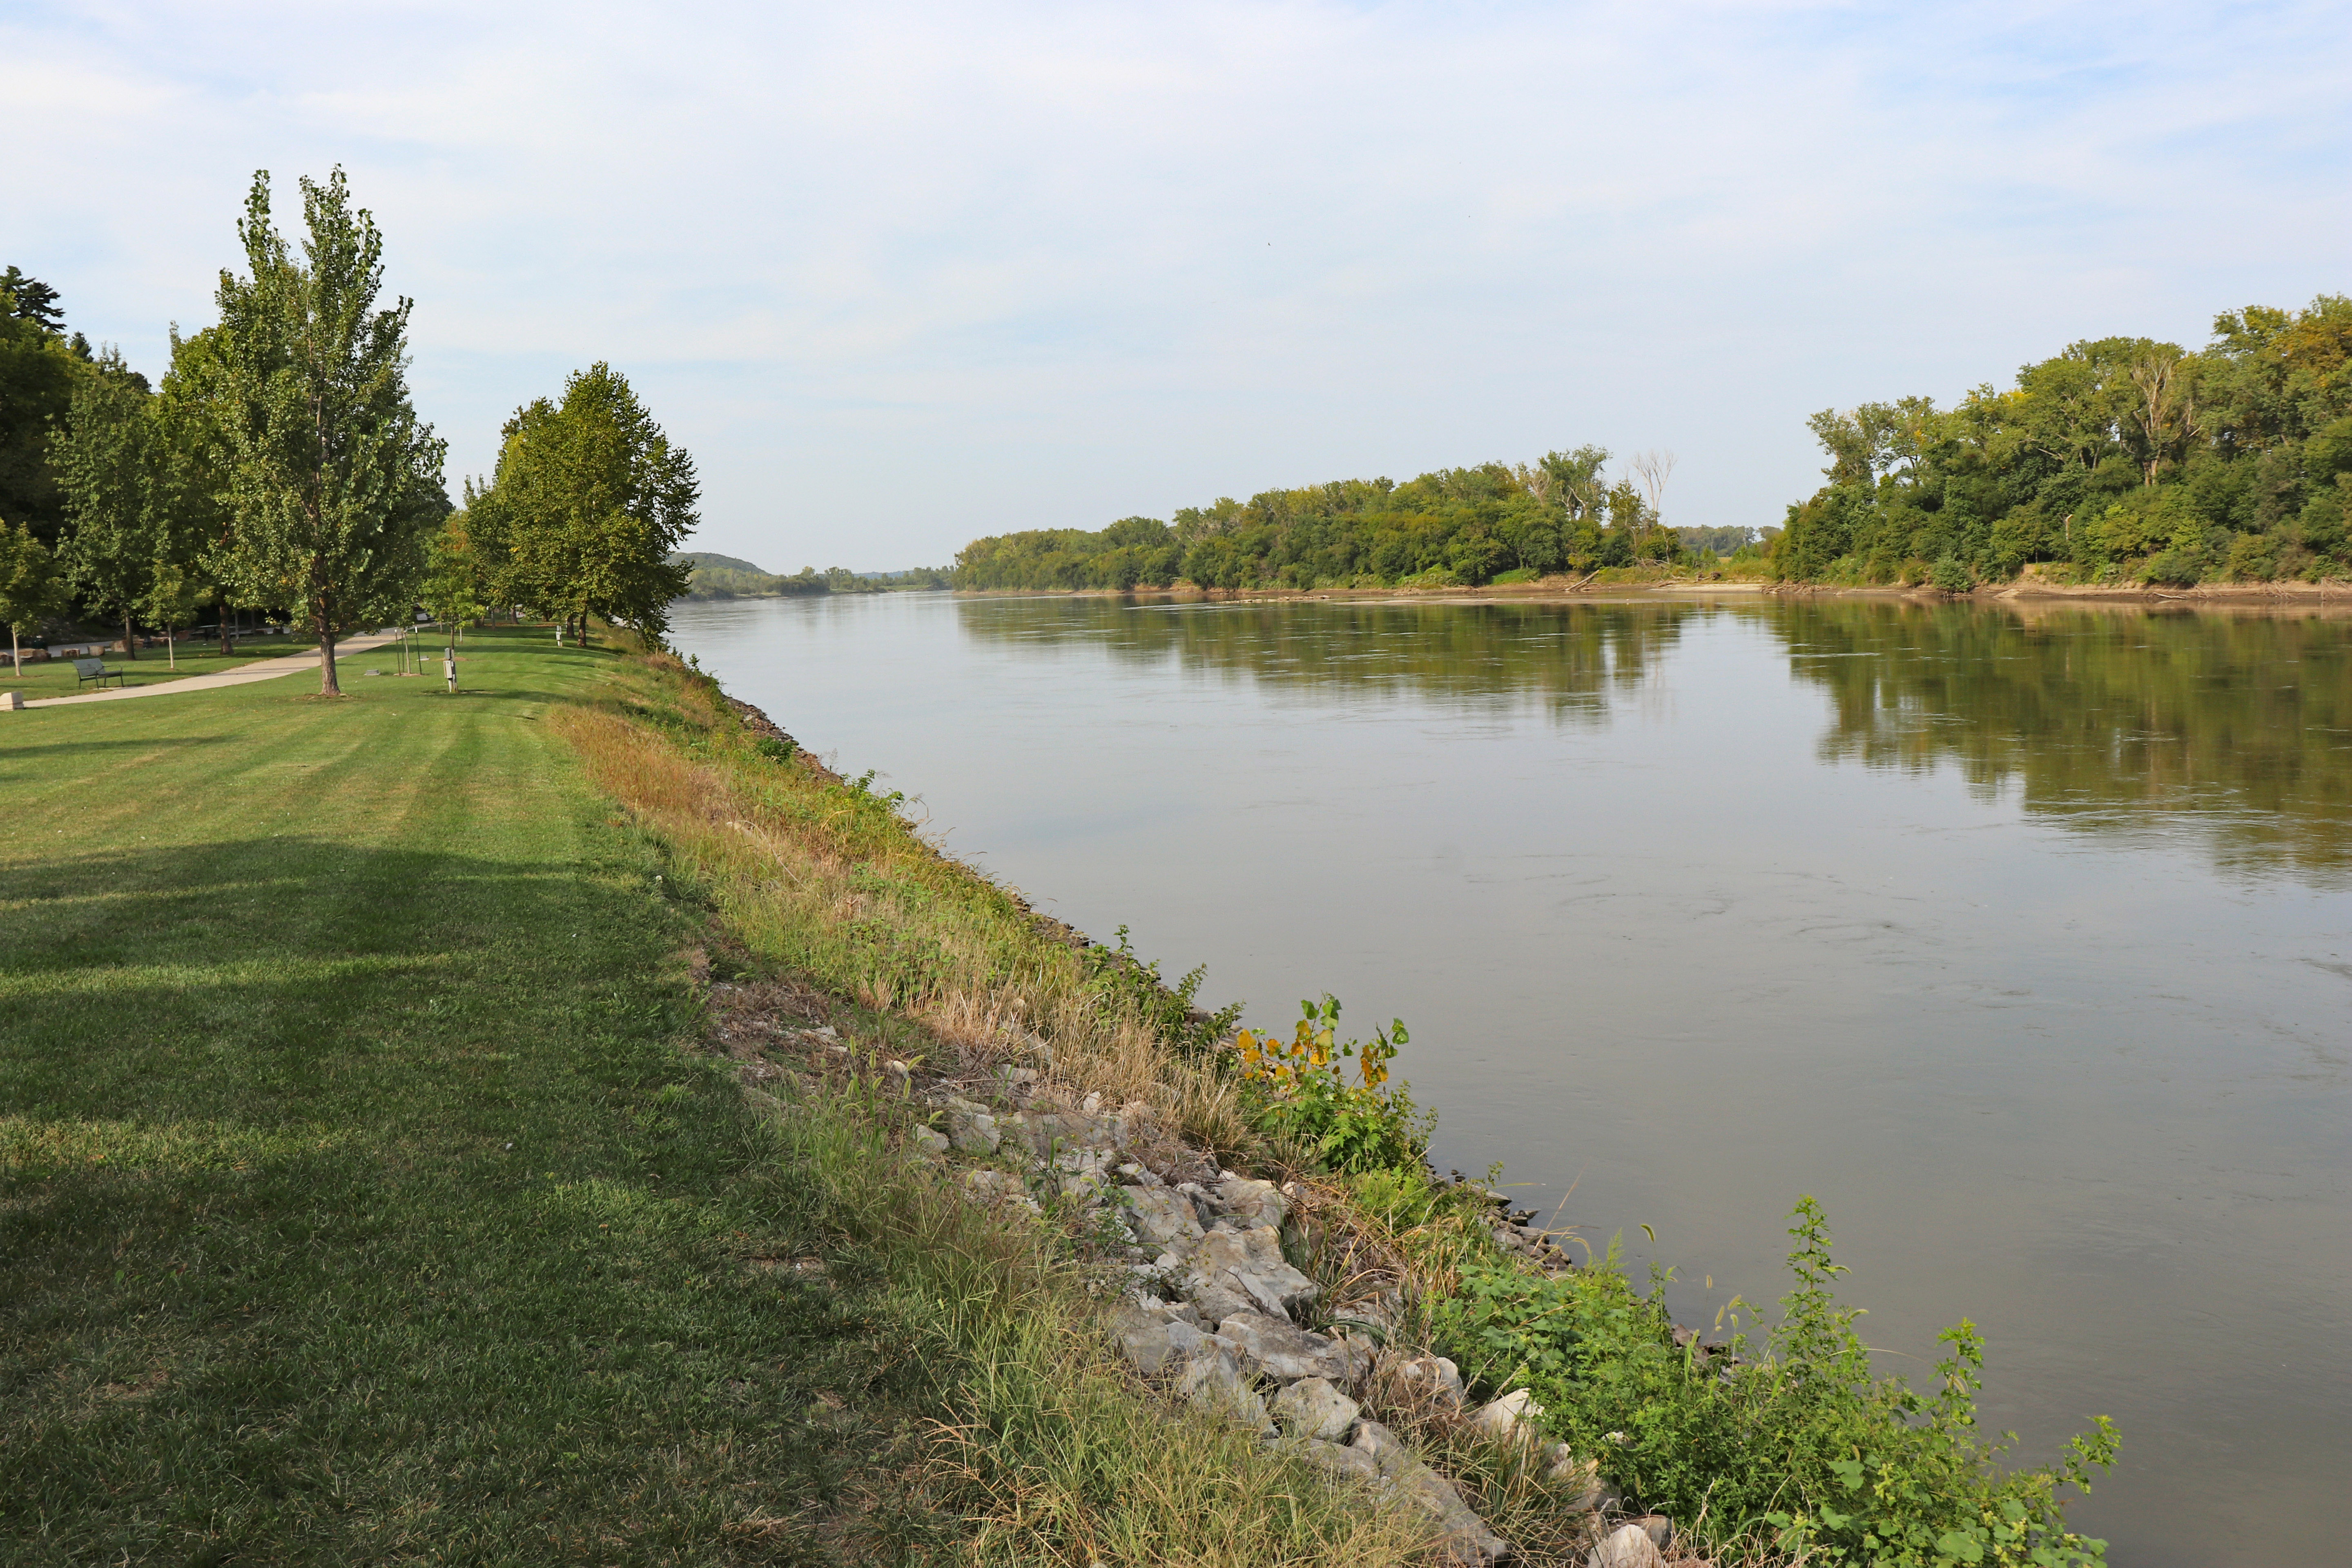 Pathway along the Missouri River upstream from Riverfront Park, Atchison.